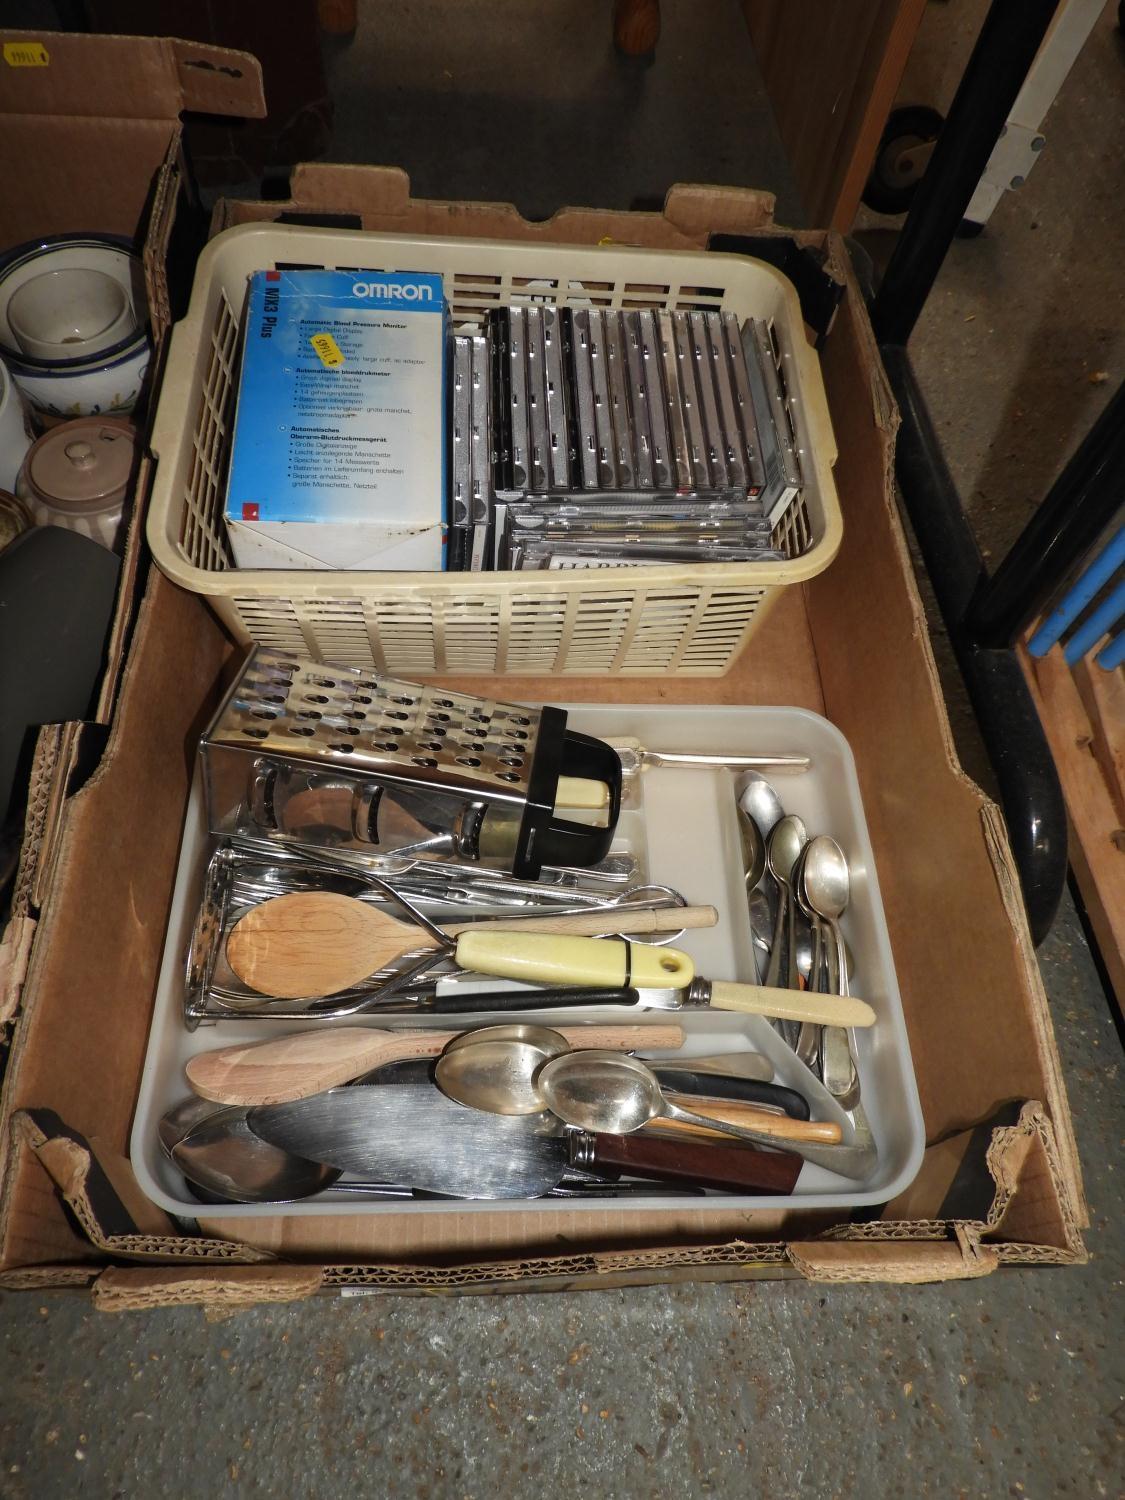 Box of Misc - CDs and Cutlery etc